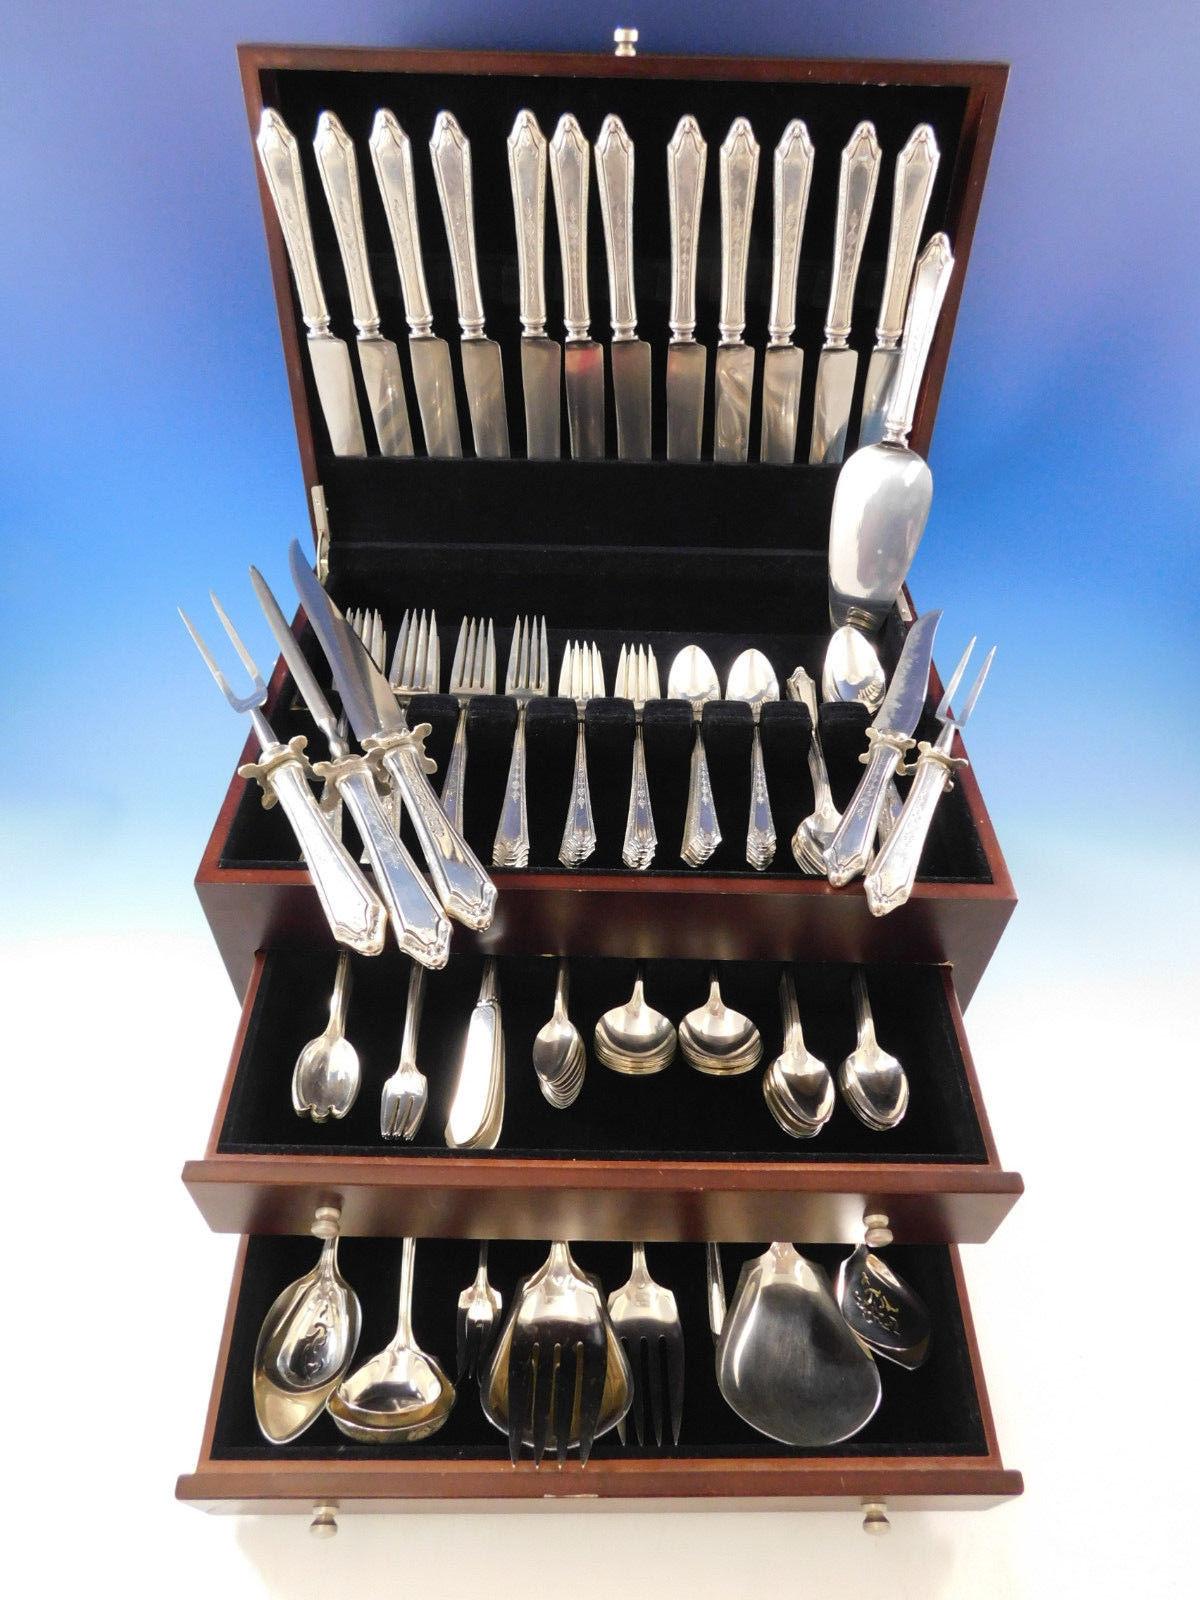 Monumental dinner size Virginia Lee by Towle sterling silver flatware set, 163 Pieces. This scarce set includes:

12 dinner size knives, 9 3/4